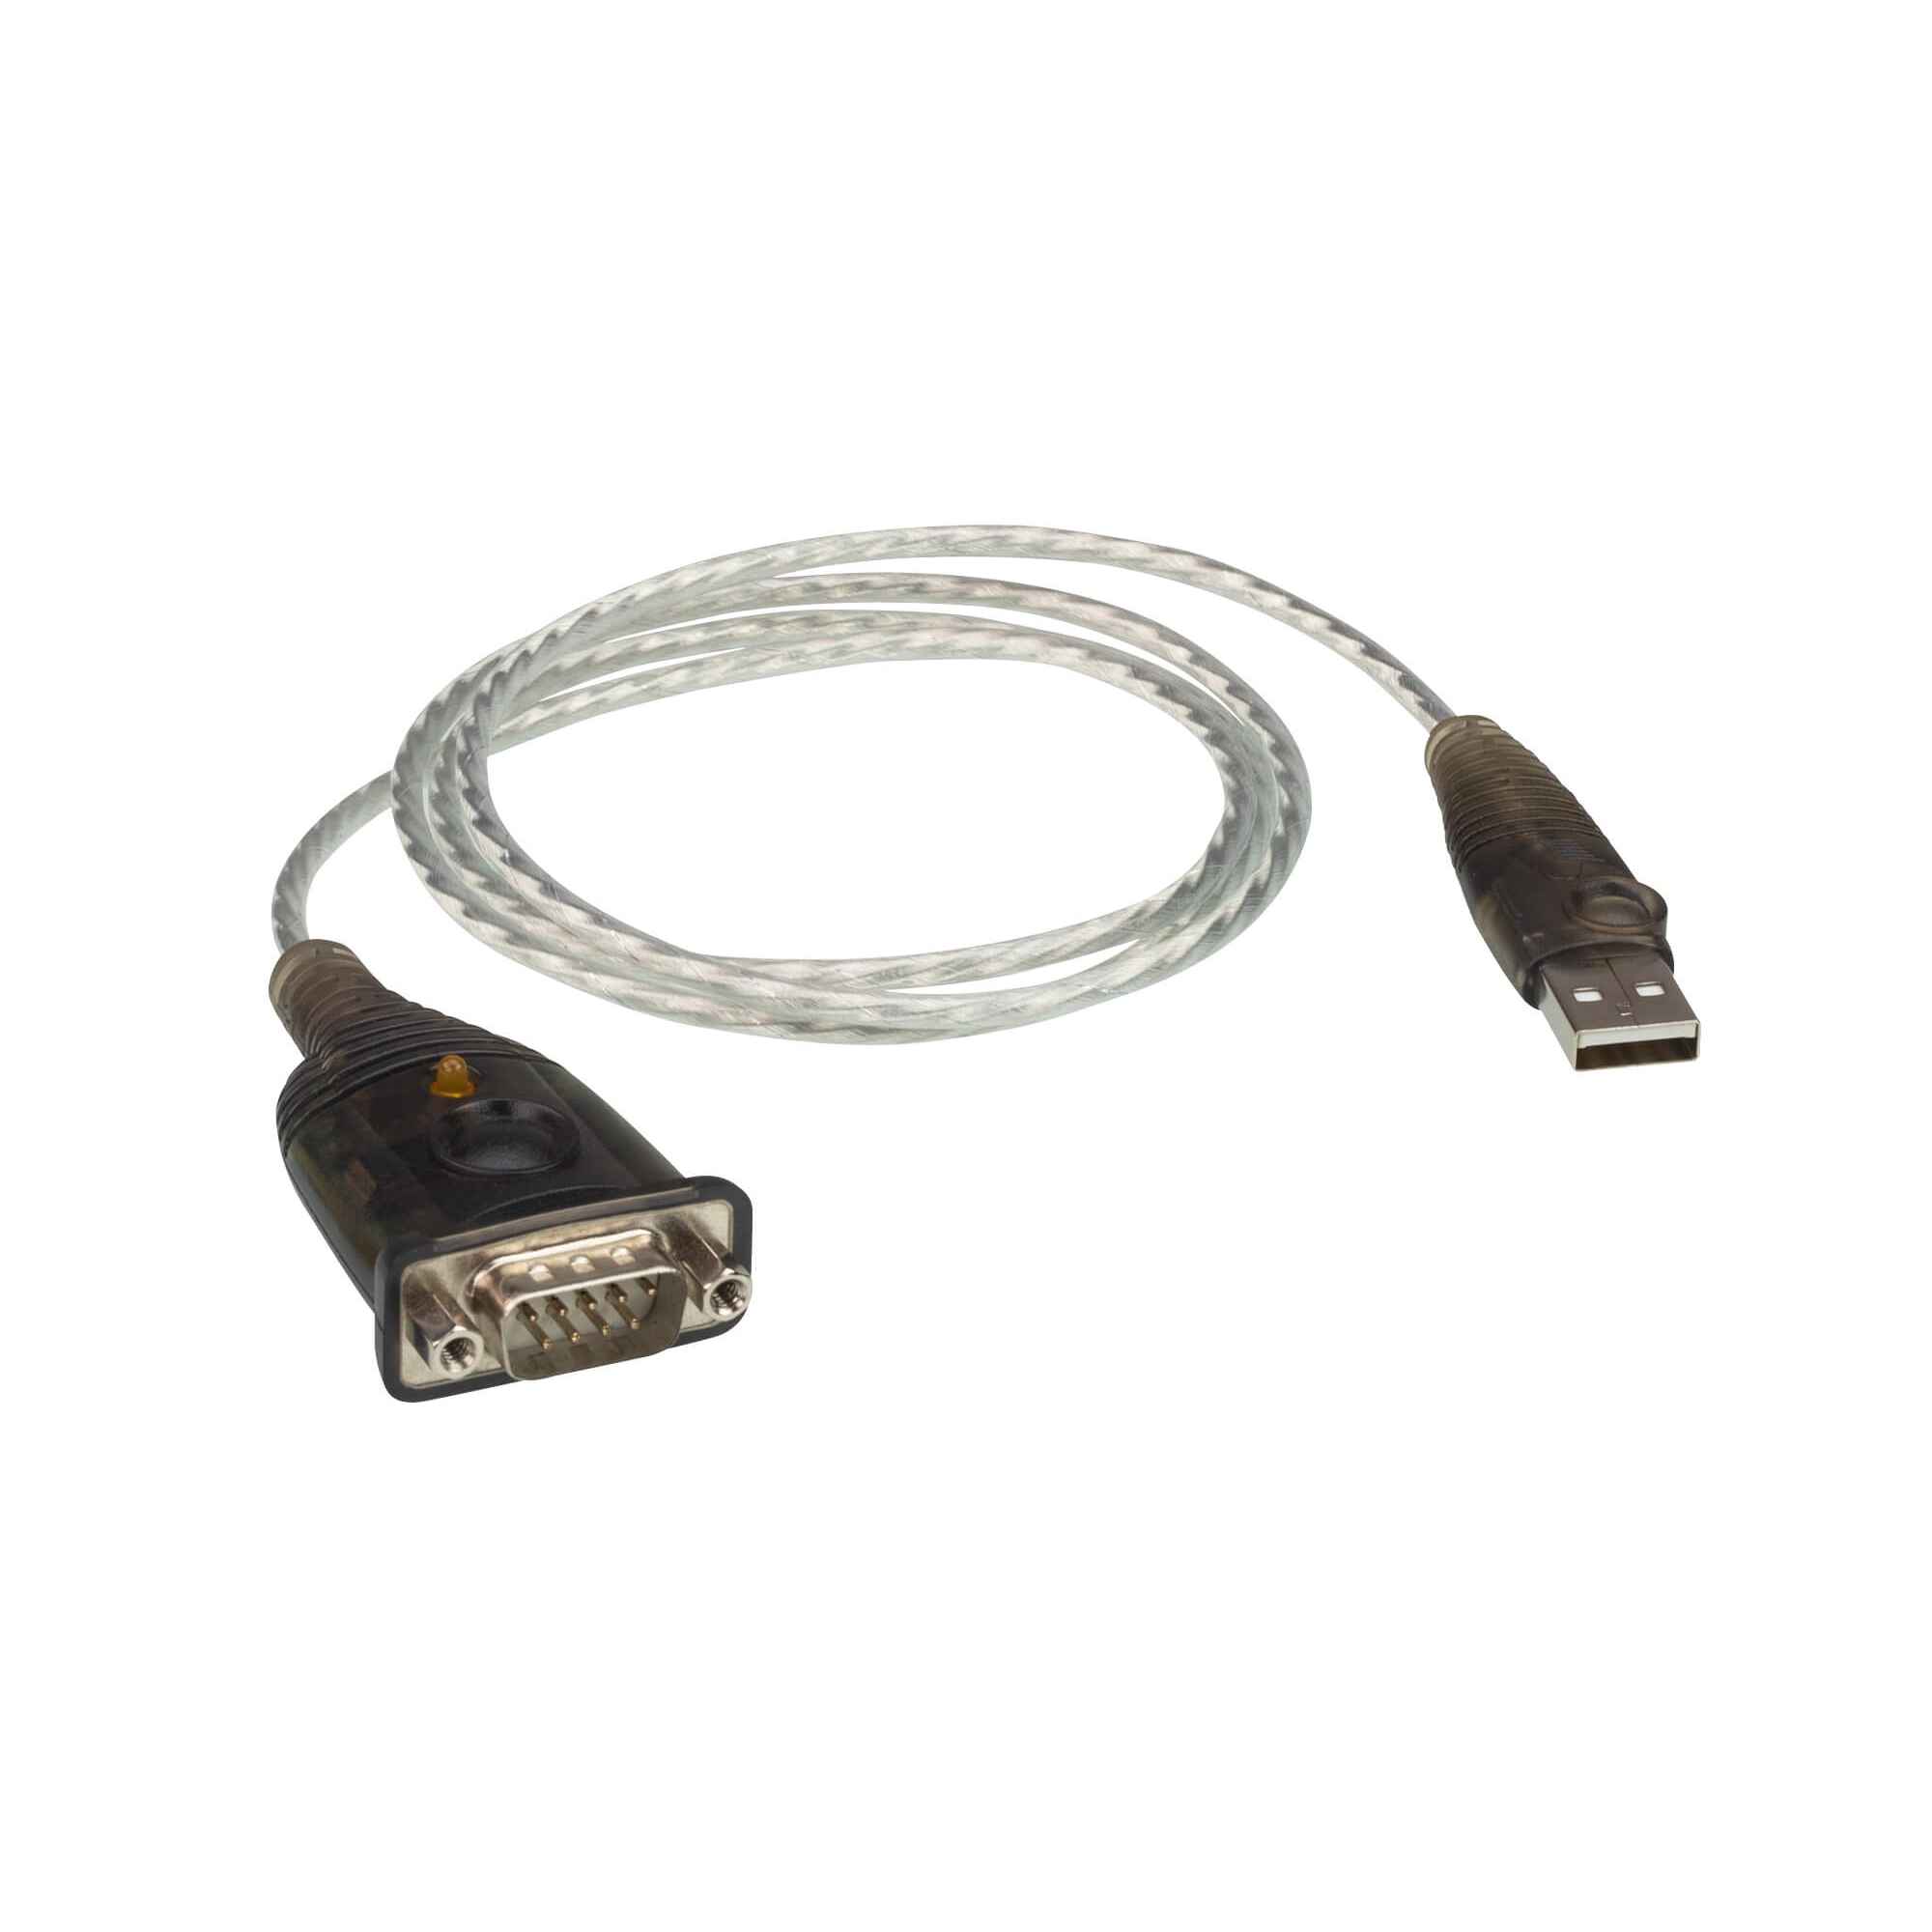 Aten uc232a driver for mac os